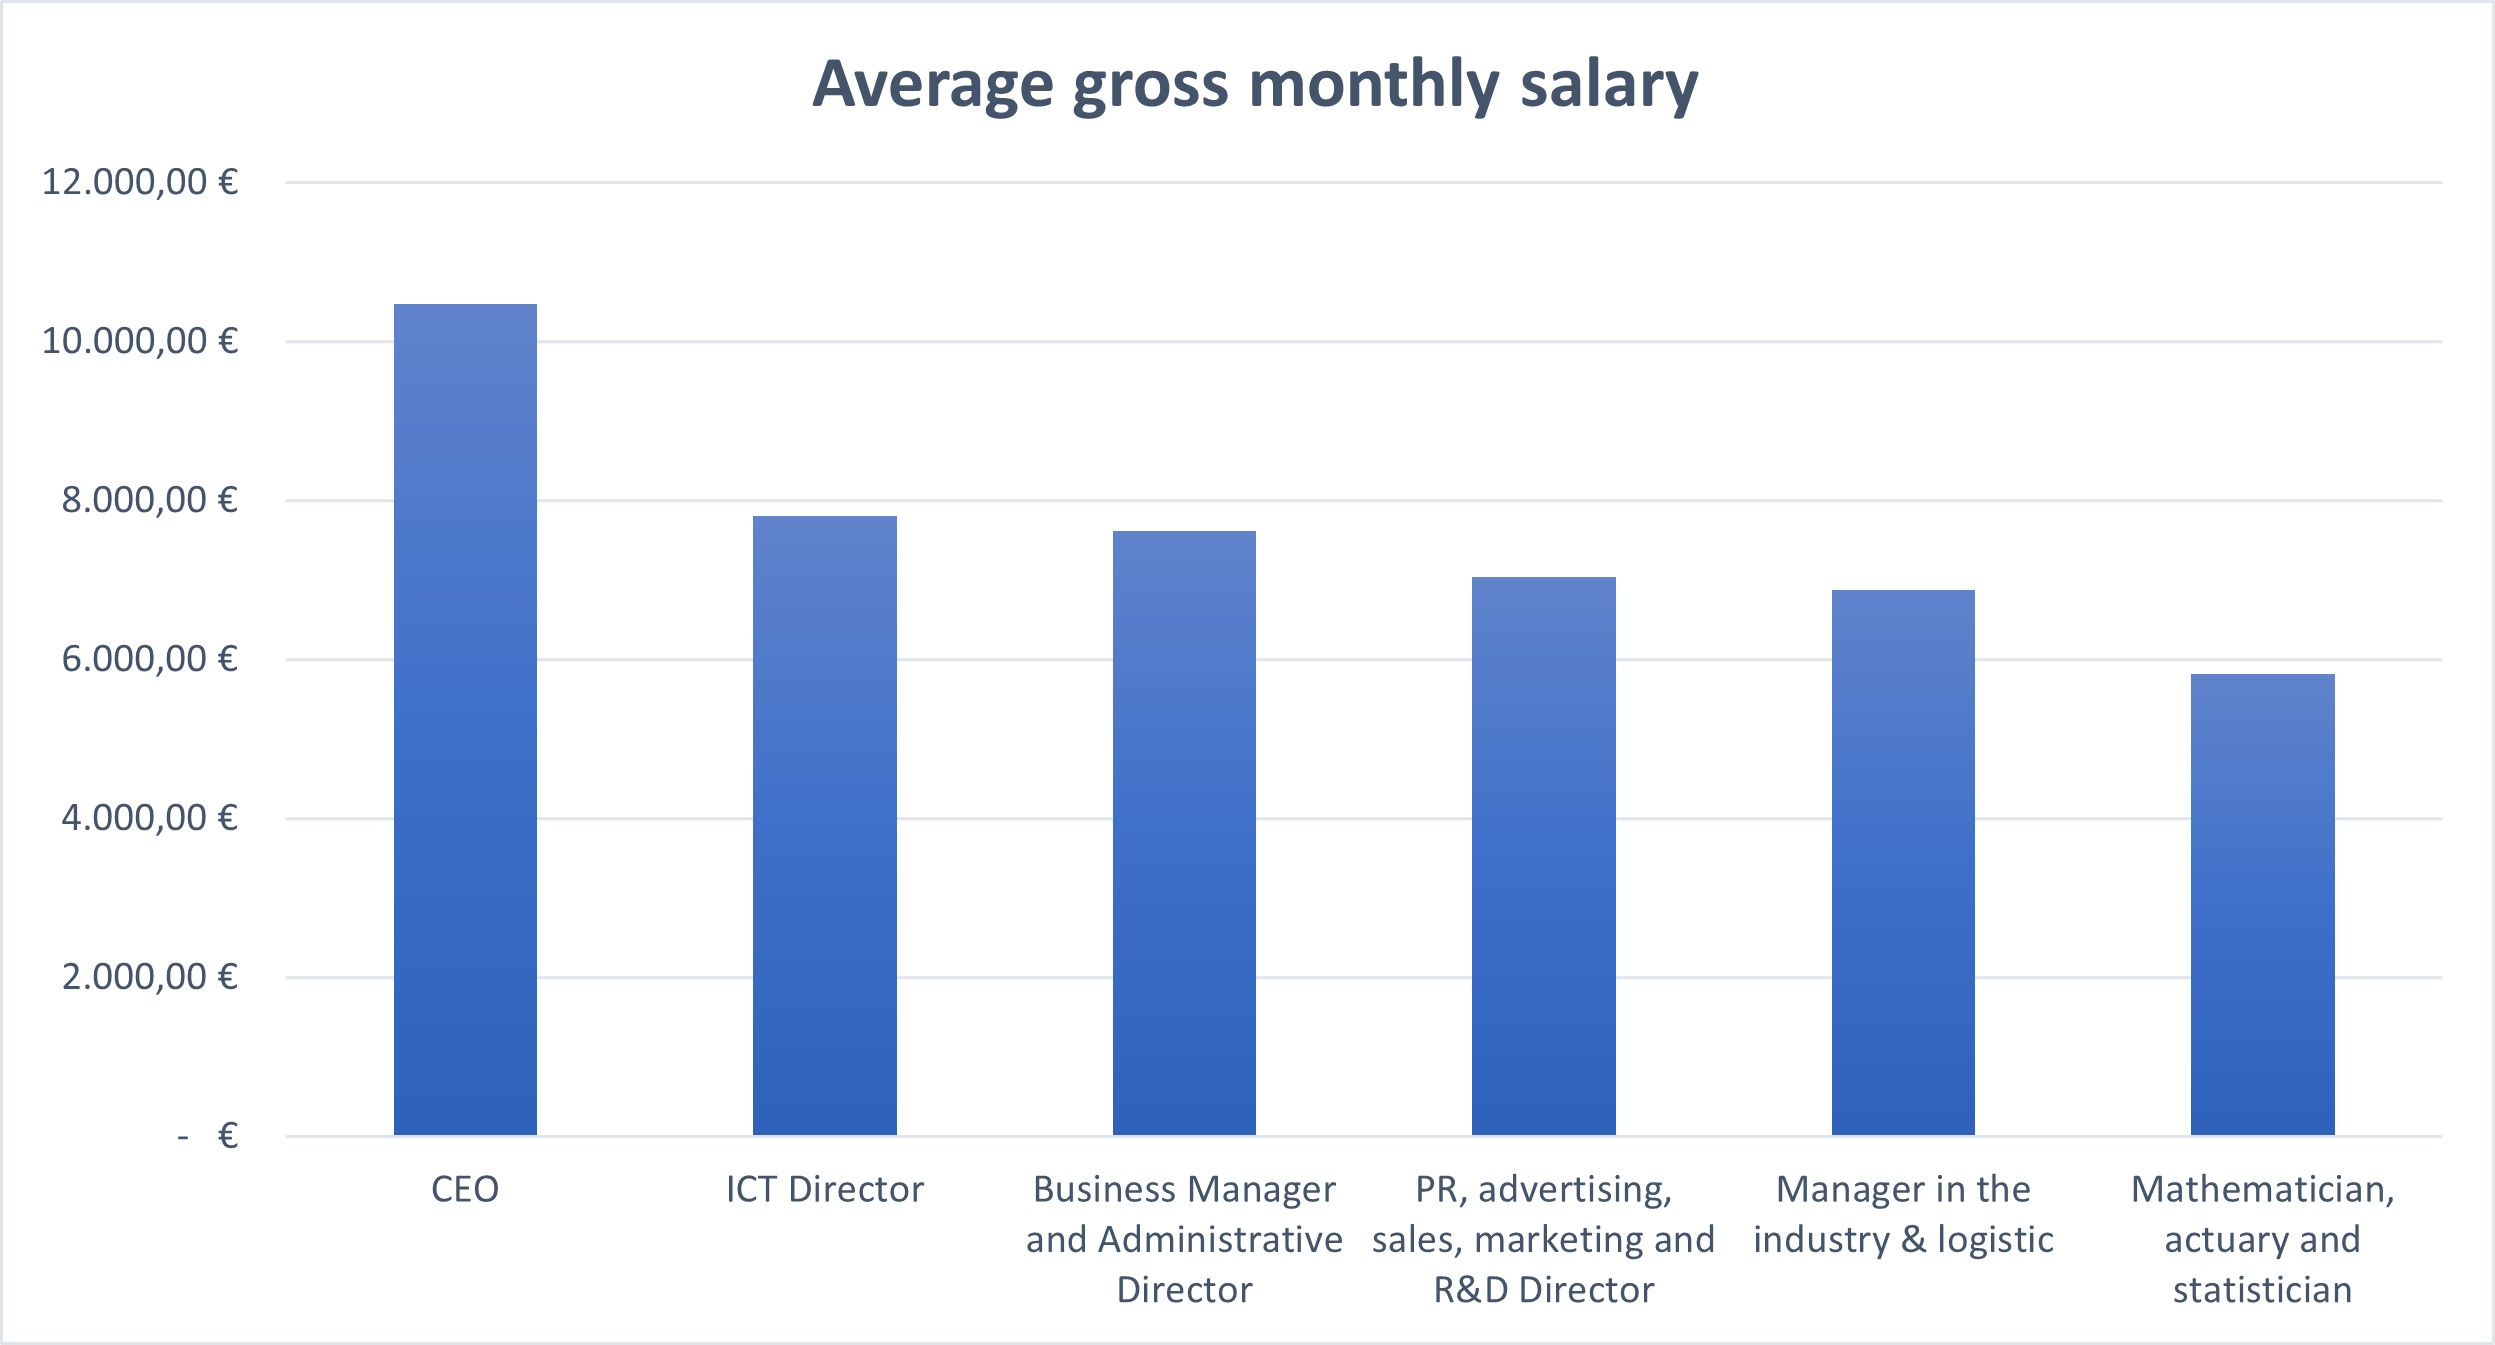 Actuary, among the highest paid professions in Belgium